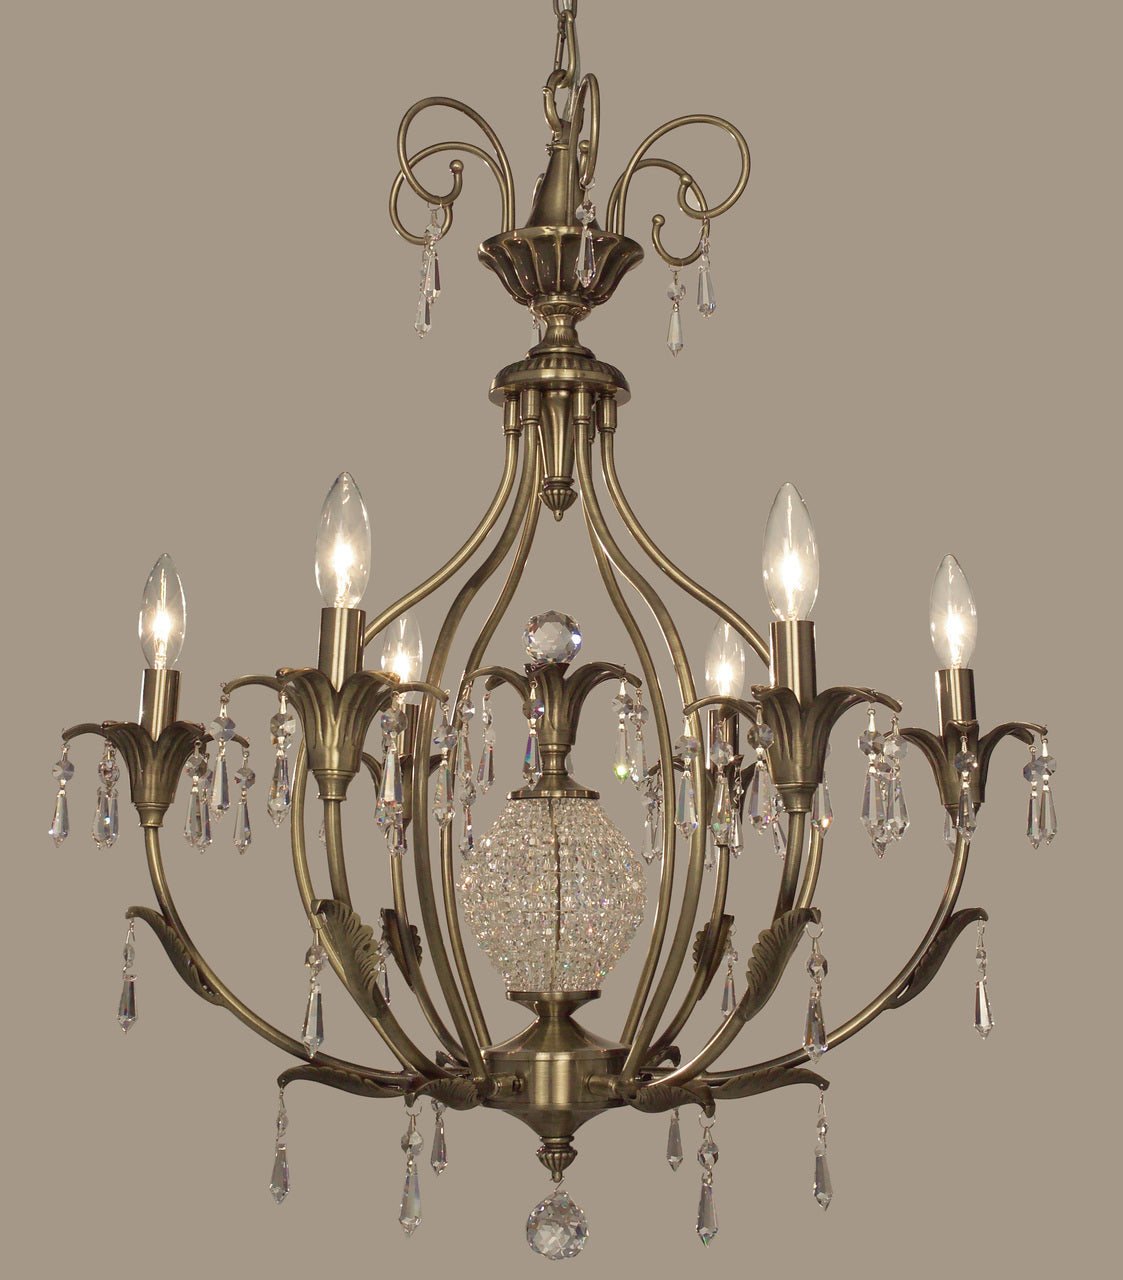 Classic Lighting 16116 ABR SC Sharon Crystal Chandelier in Antique Brass